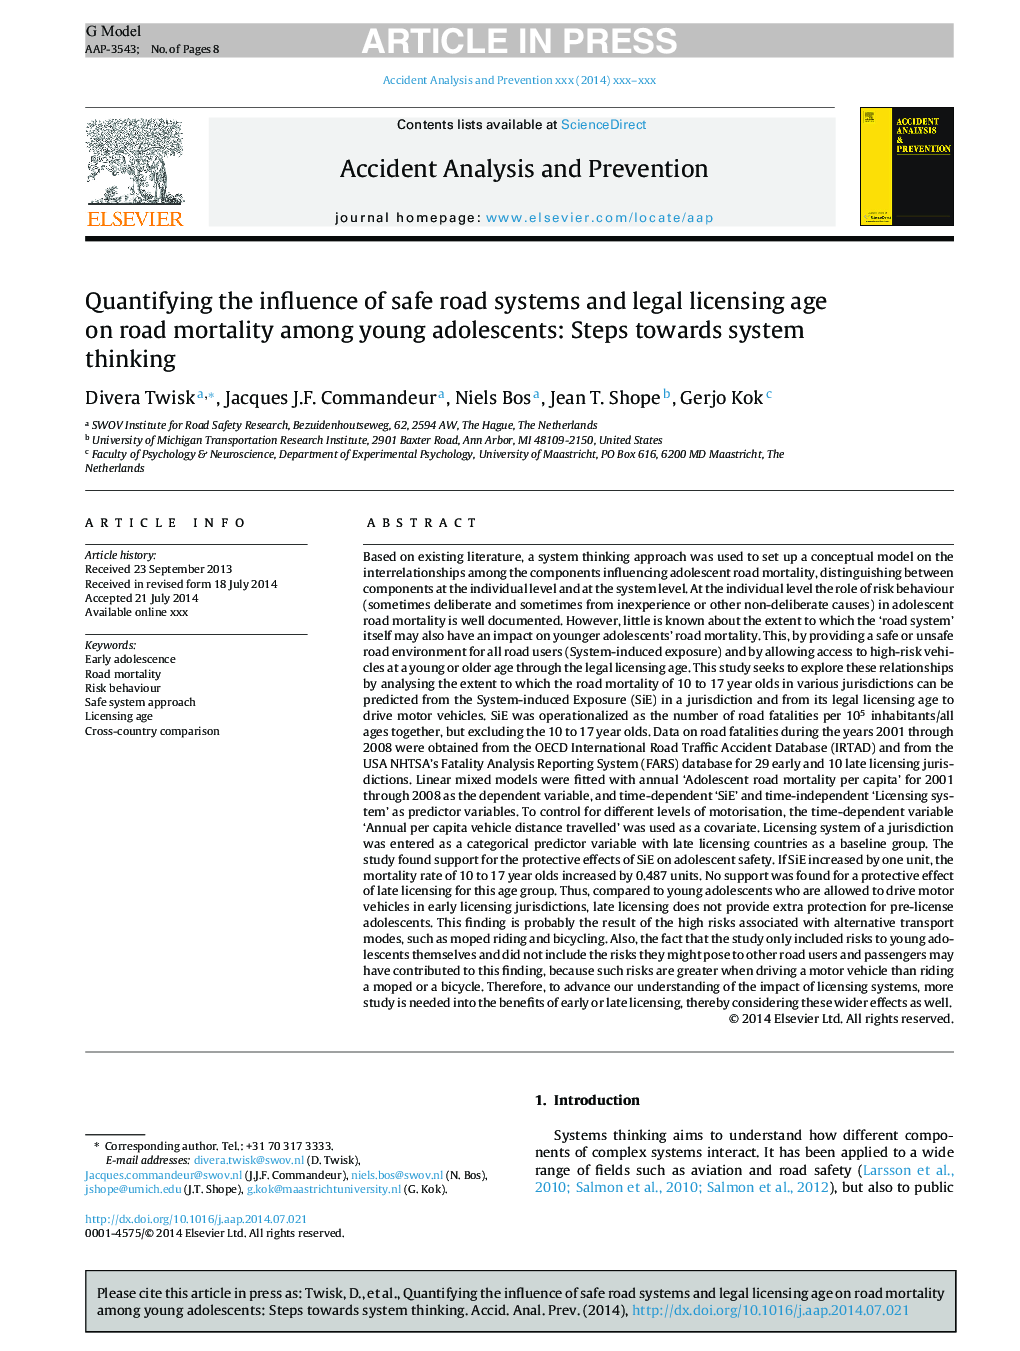 Quantifying the influence of safe road systems and legal licensing age on road mortality among young adolescents: Steps towards system thinking